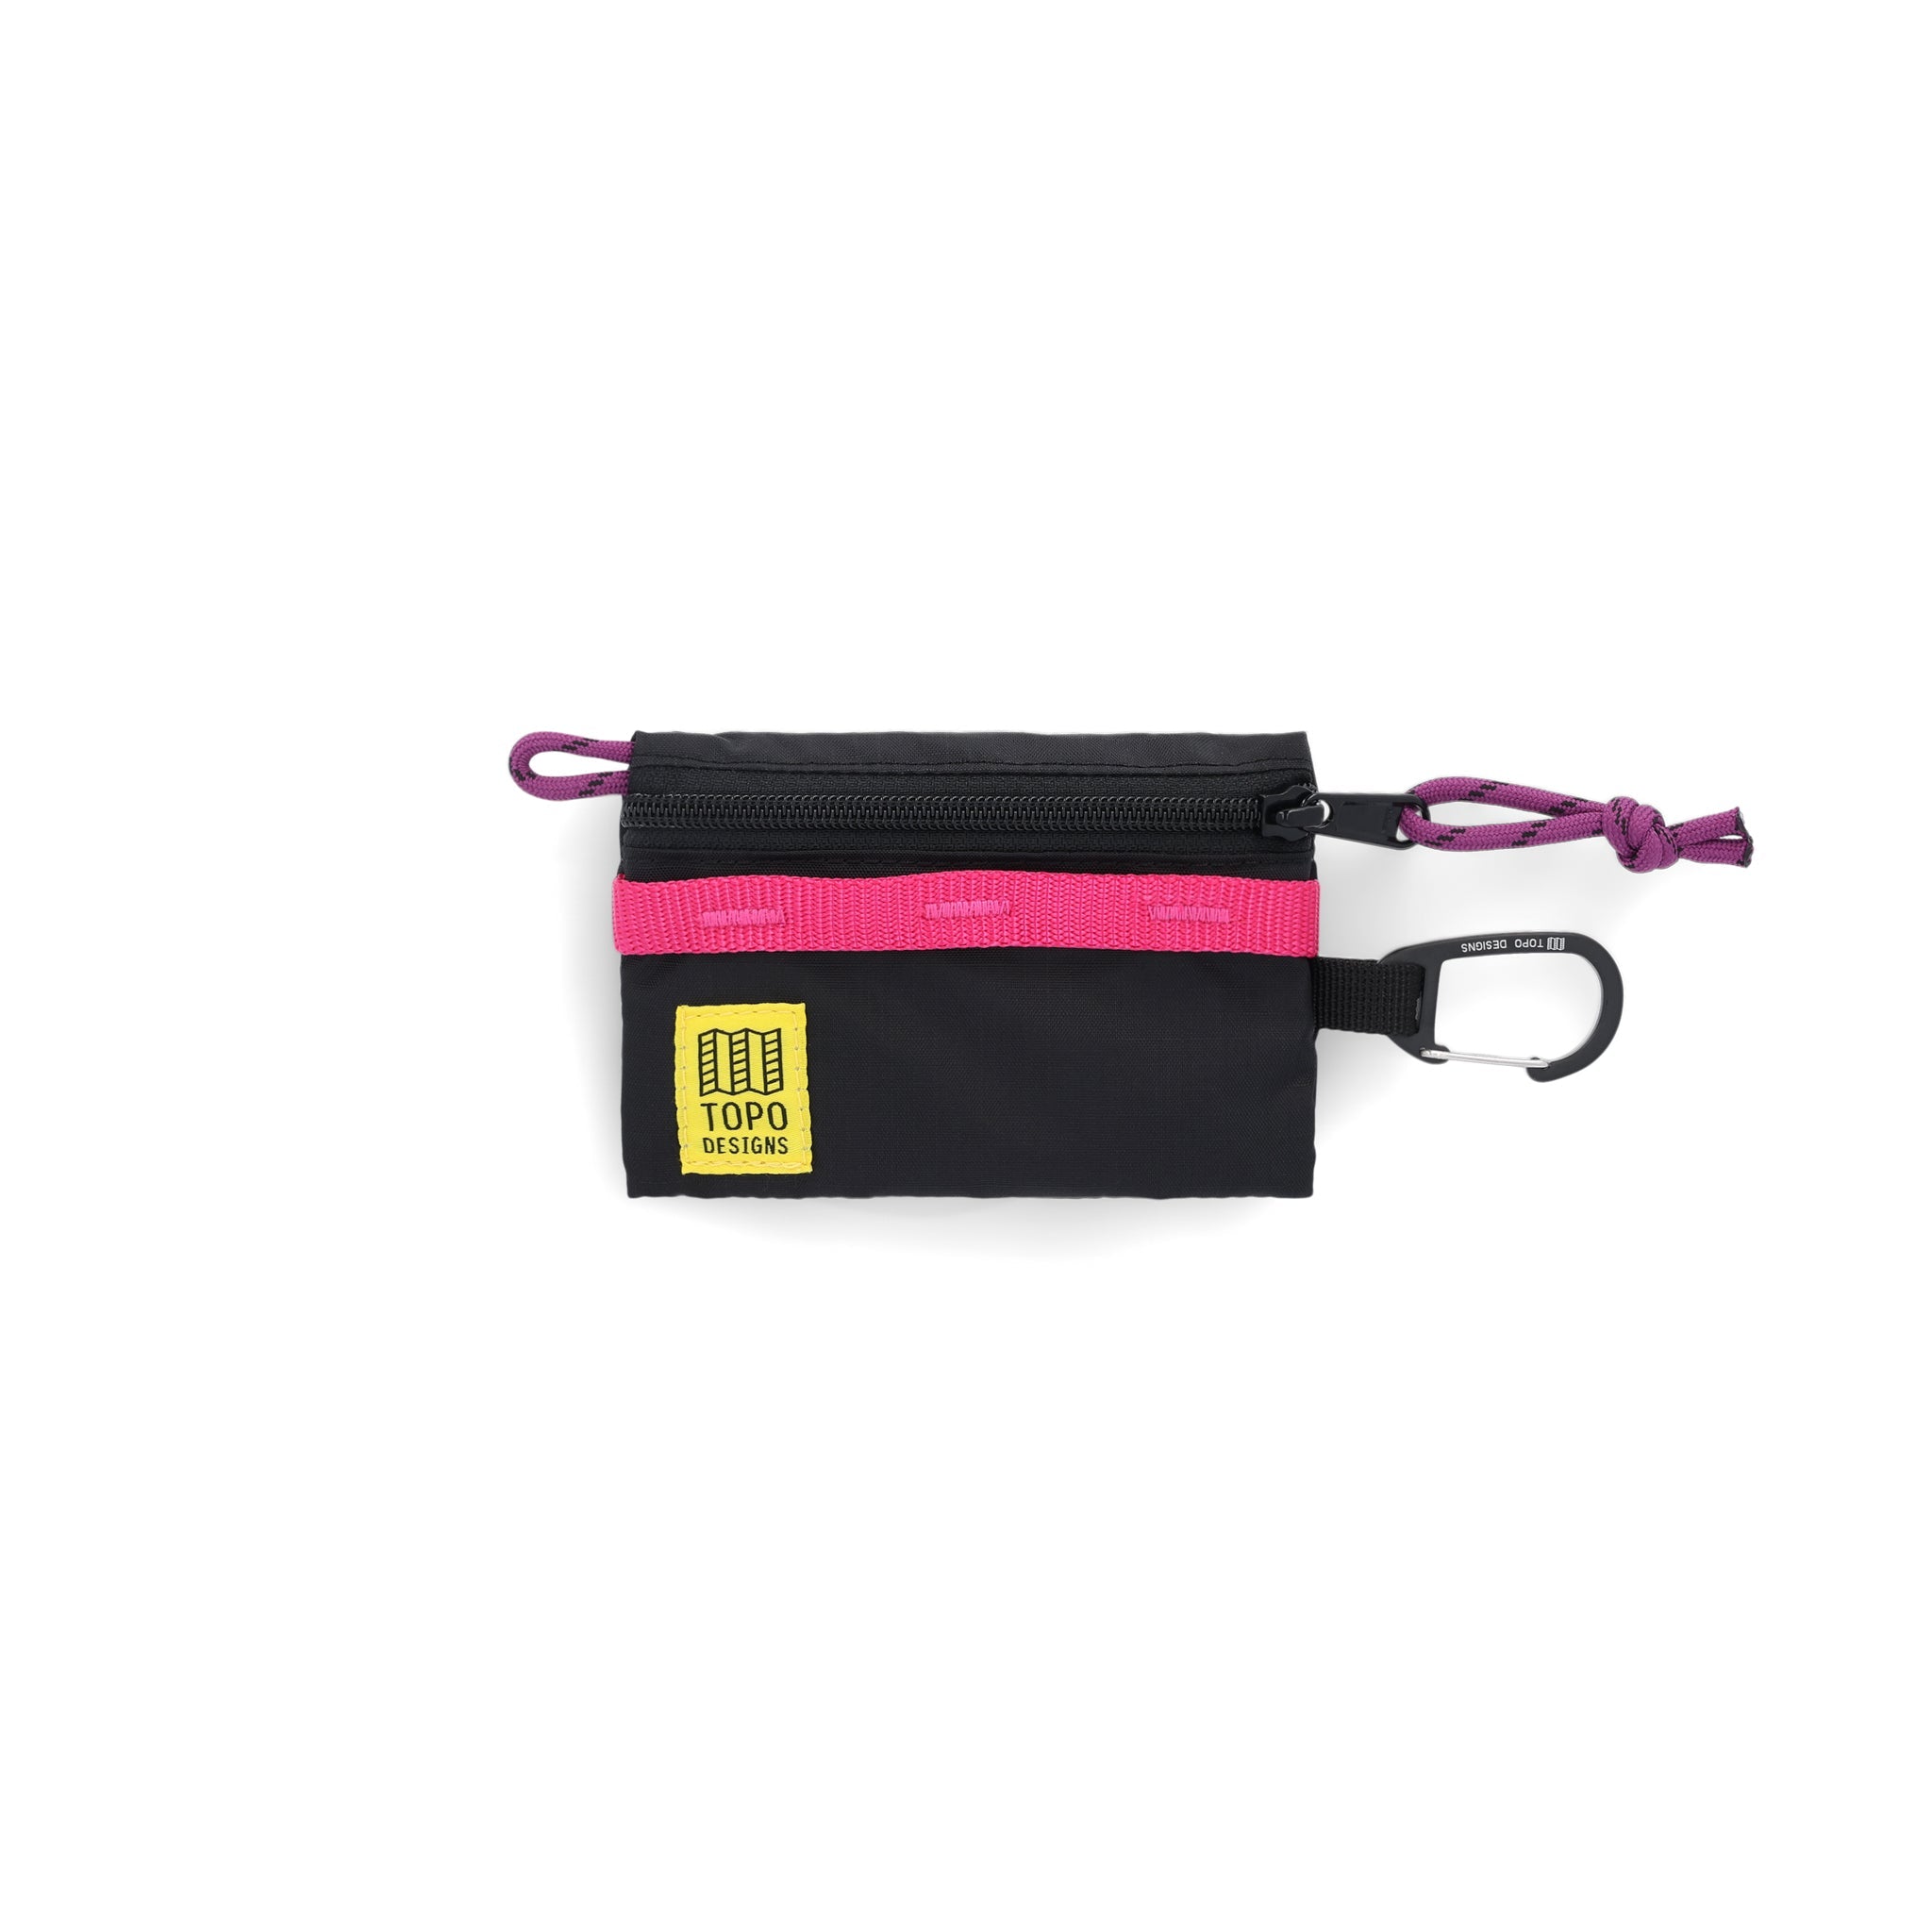 Topo Designs Mountain Accessory Bag carabiner clip pouch keychain wallet in "Black" lightweight recycled nylon.